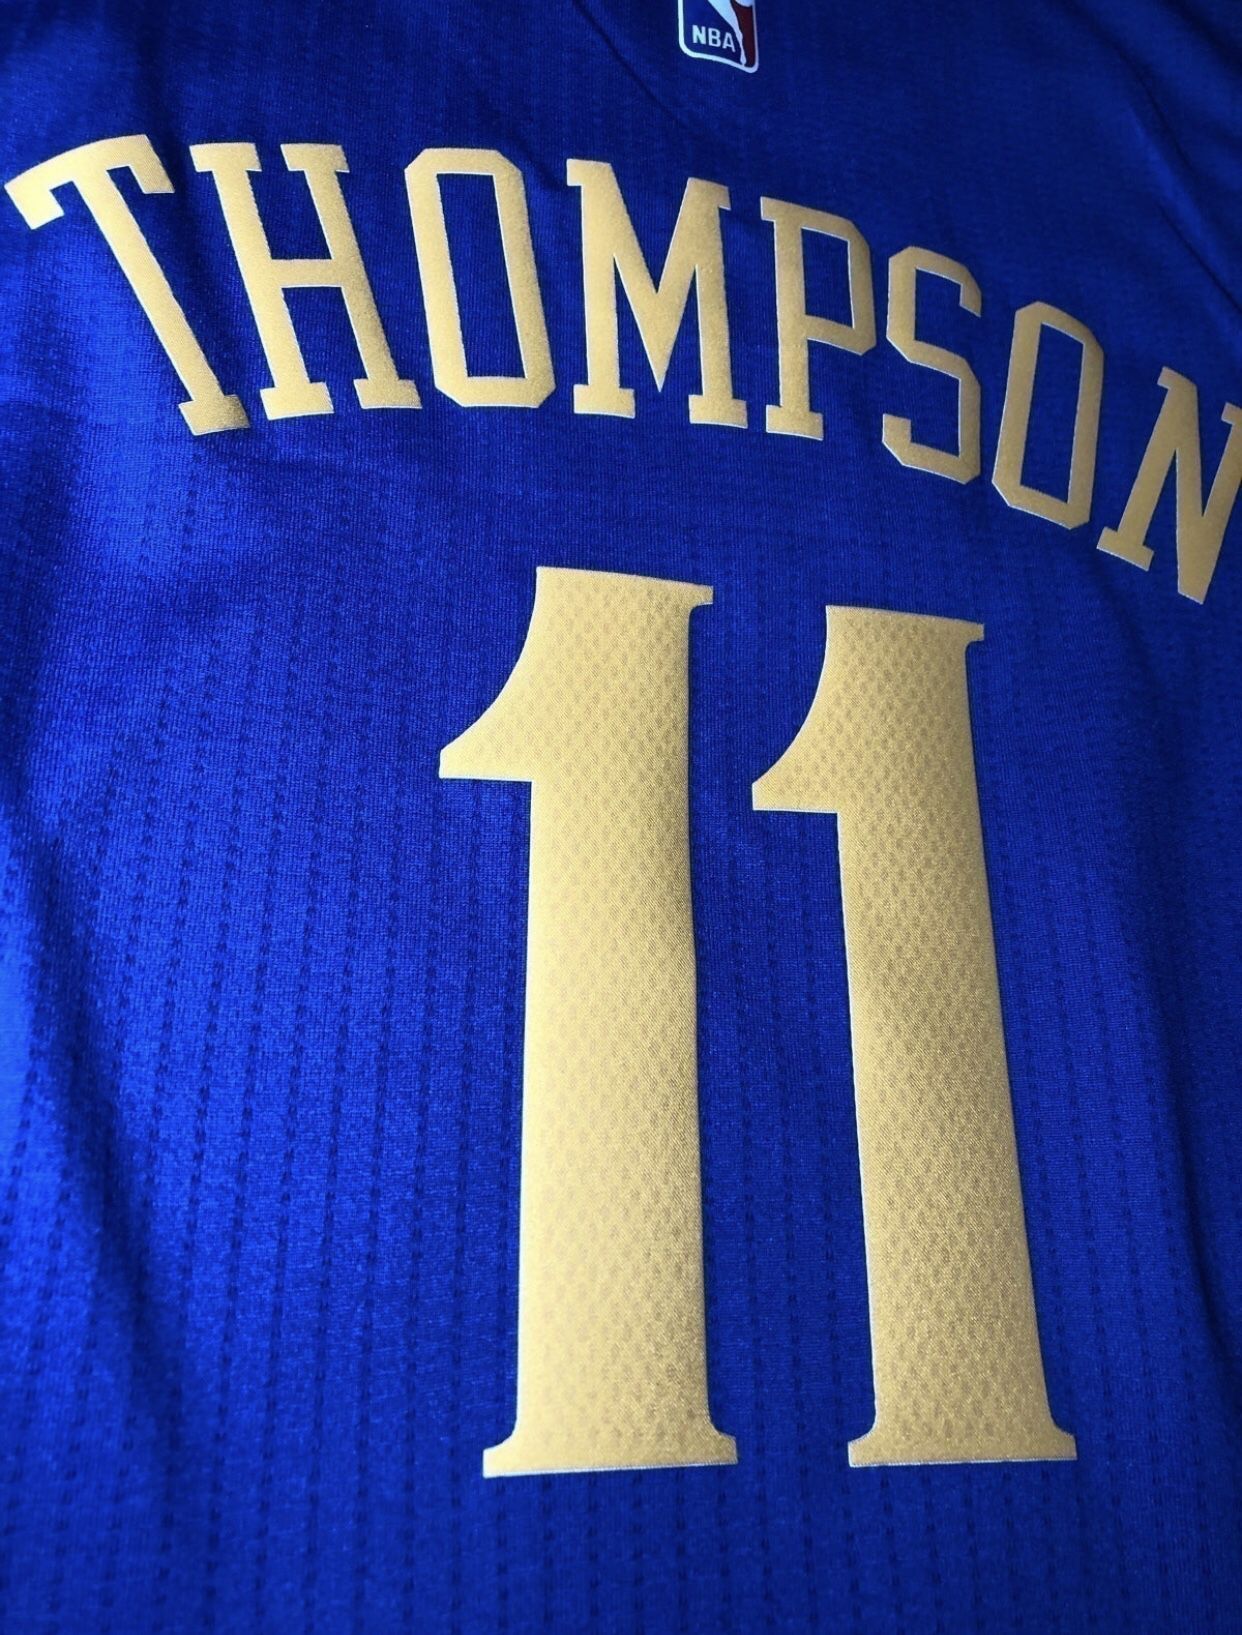 Klay Thompson 11 clay Golden State Warriors city edition black jersey mens  small medium large XL for Sale in San Jose, CA - OfferUp